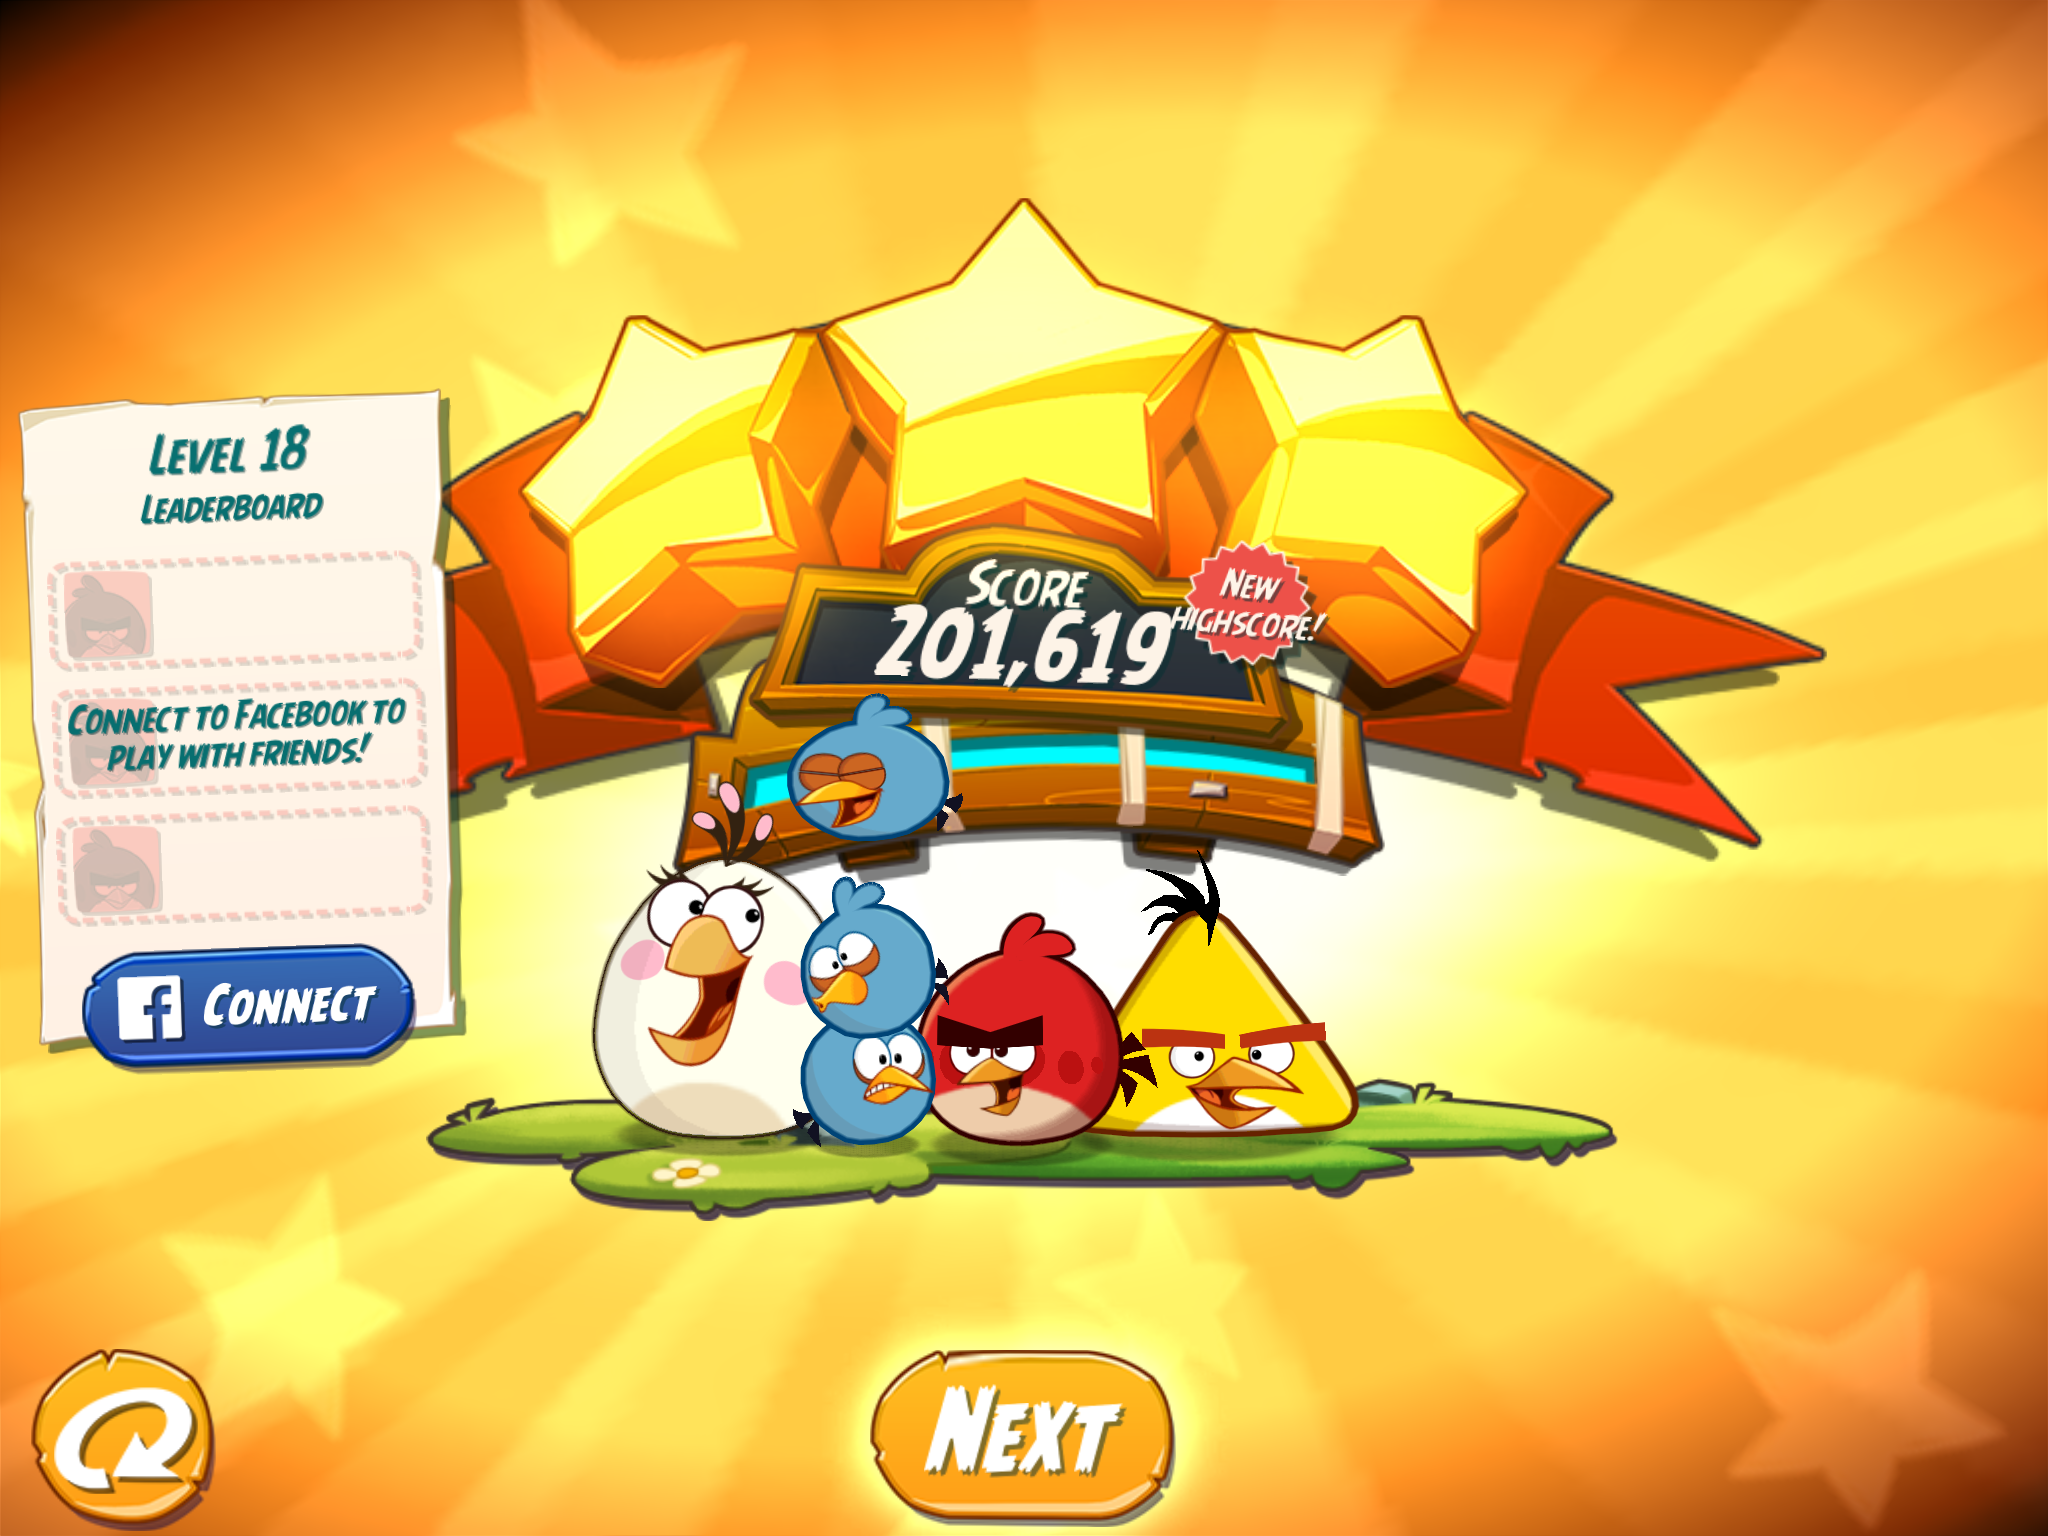 Spindy12: Angry Birds 2: Level 18 (iOS) 201,619 points on 2016-12-20 19:37:10